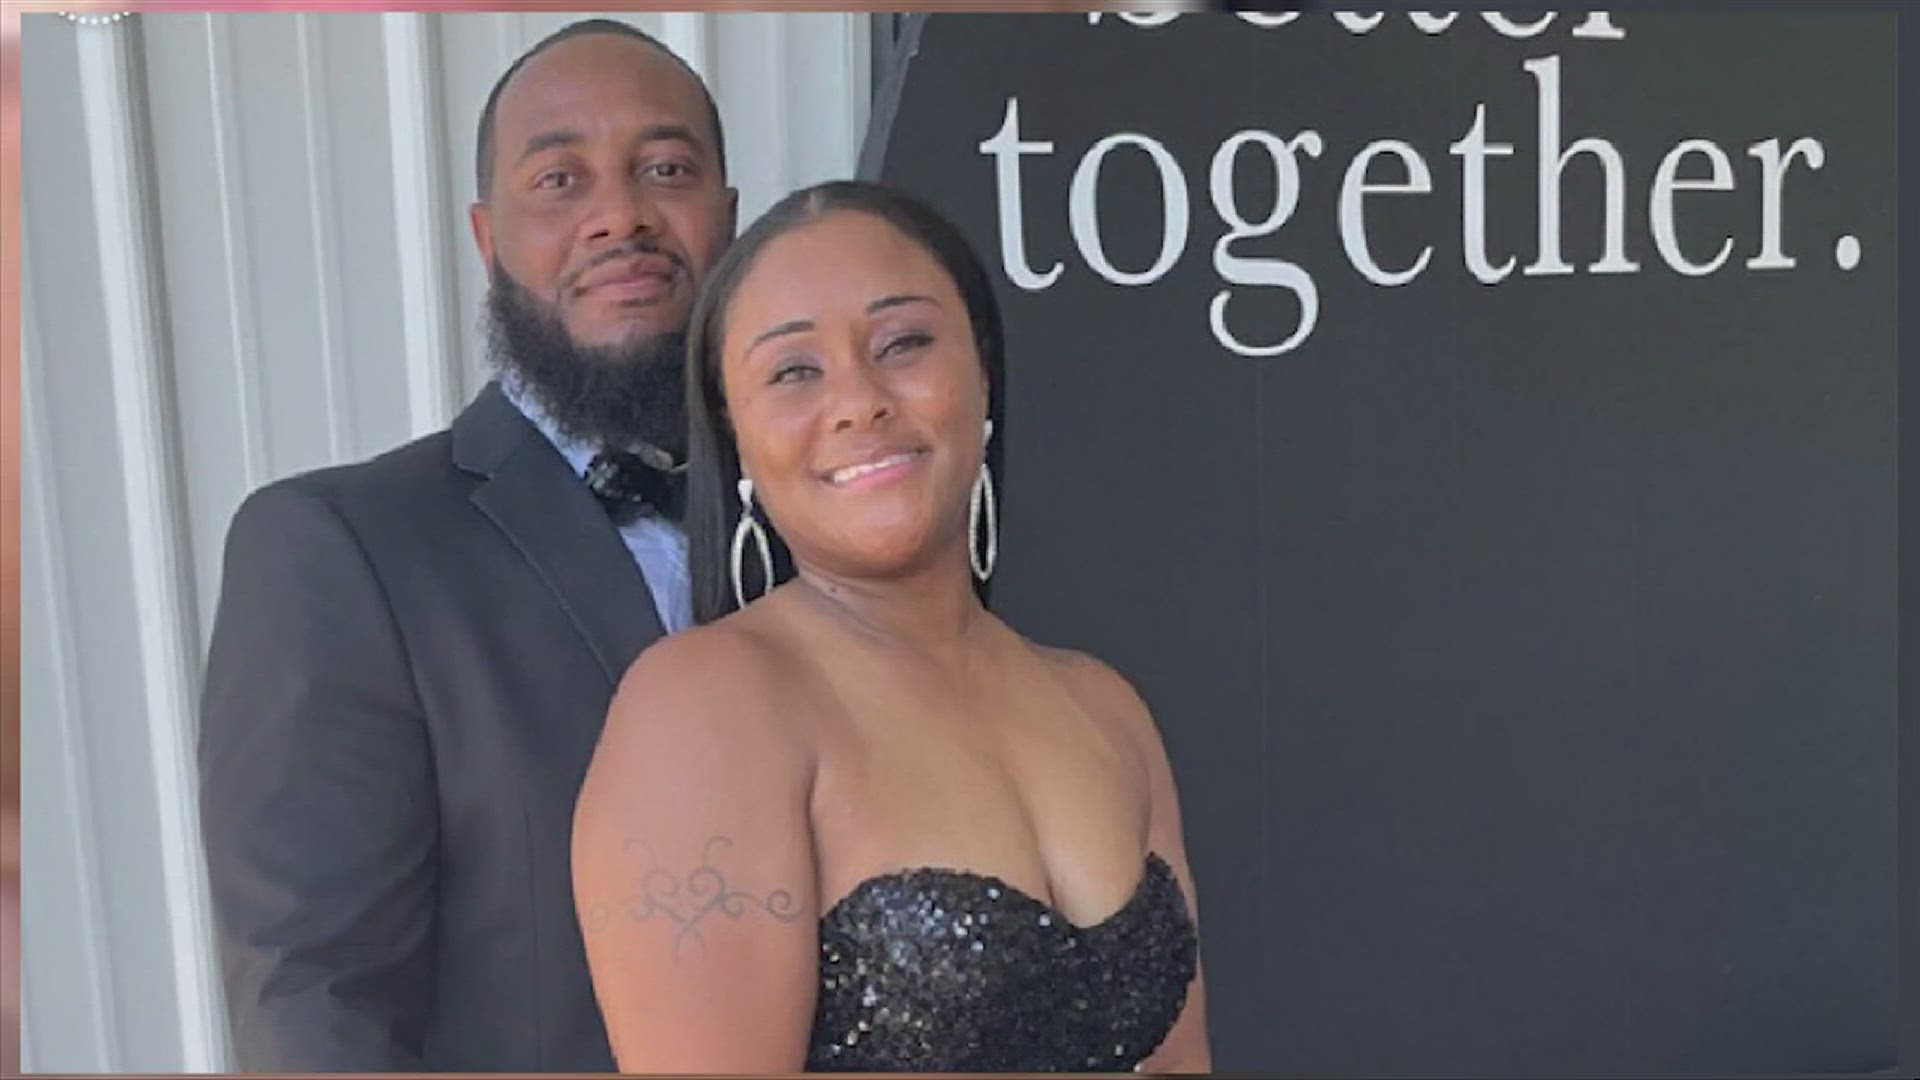 Steve Perkins was shot and killed by Decatur police more than two months ago. His wife, Catrela Perkins, speaks on the impact his death has had on the family.